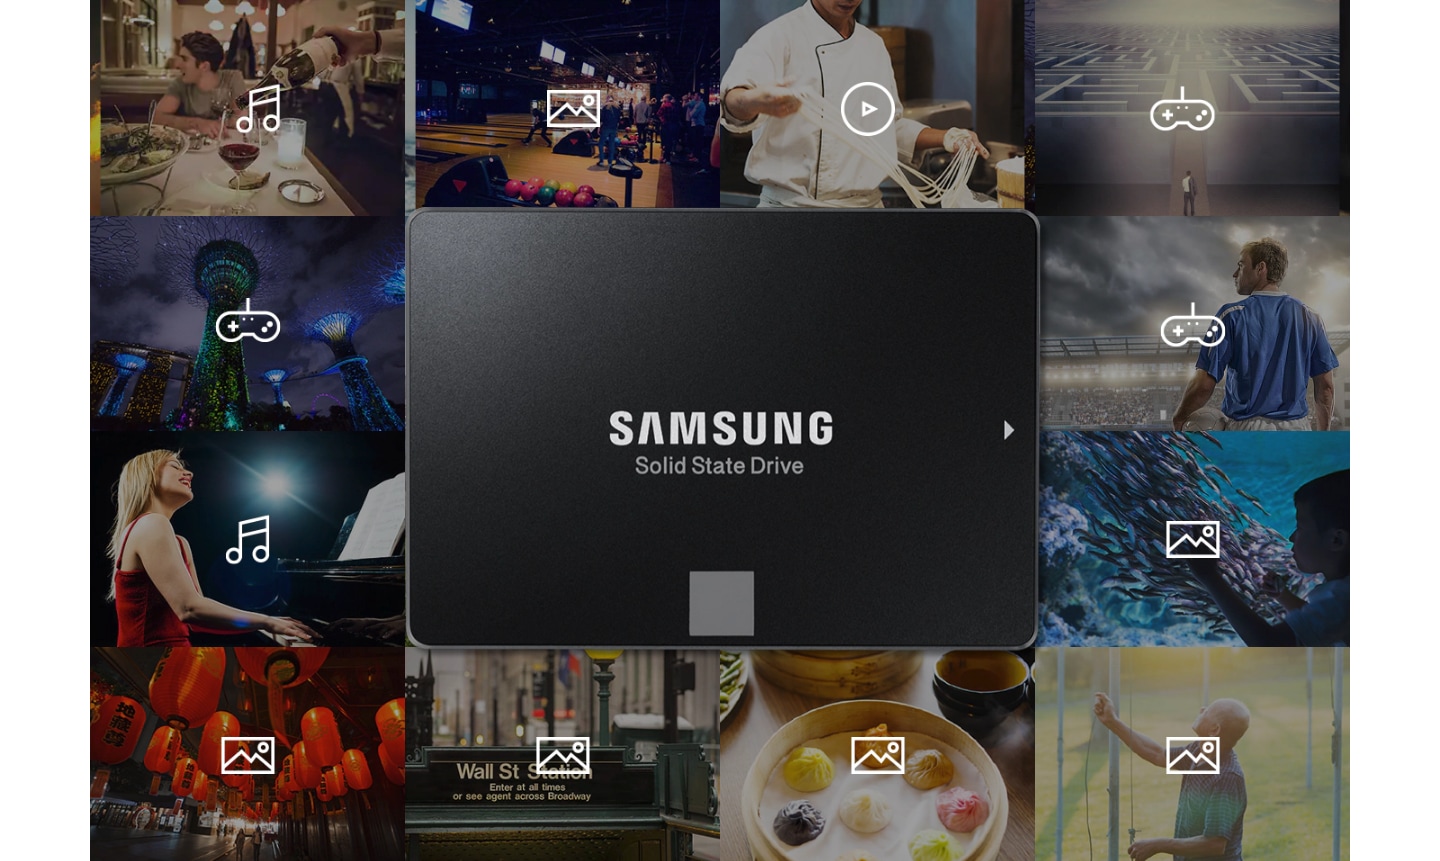 Samsung SSD is associated with information such as music, photos, videos, and games arising from a variety of daily activities (performance, sports, cooking, eating out, outdoor activities, etc.)